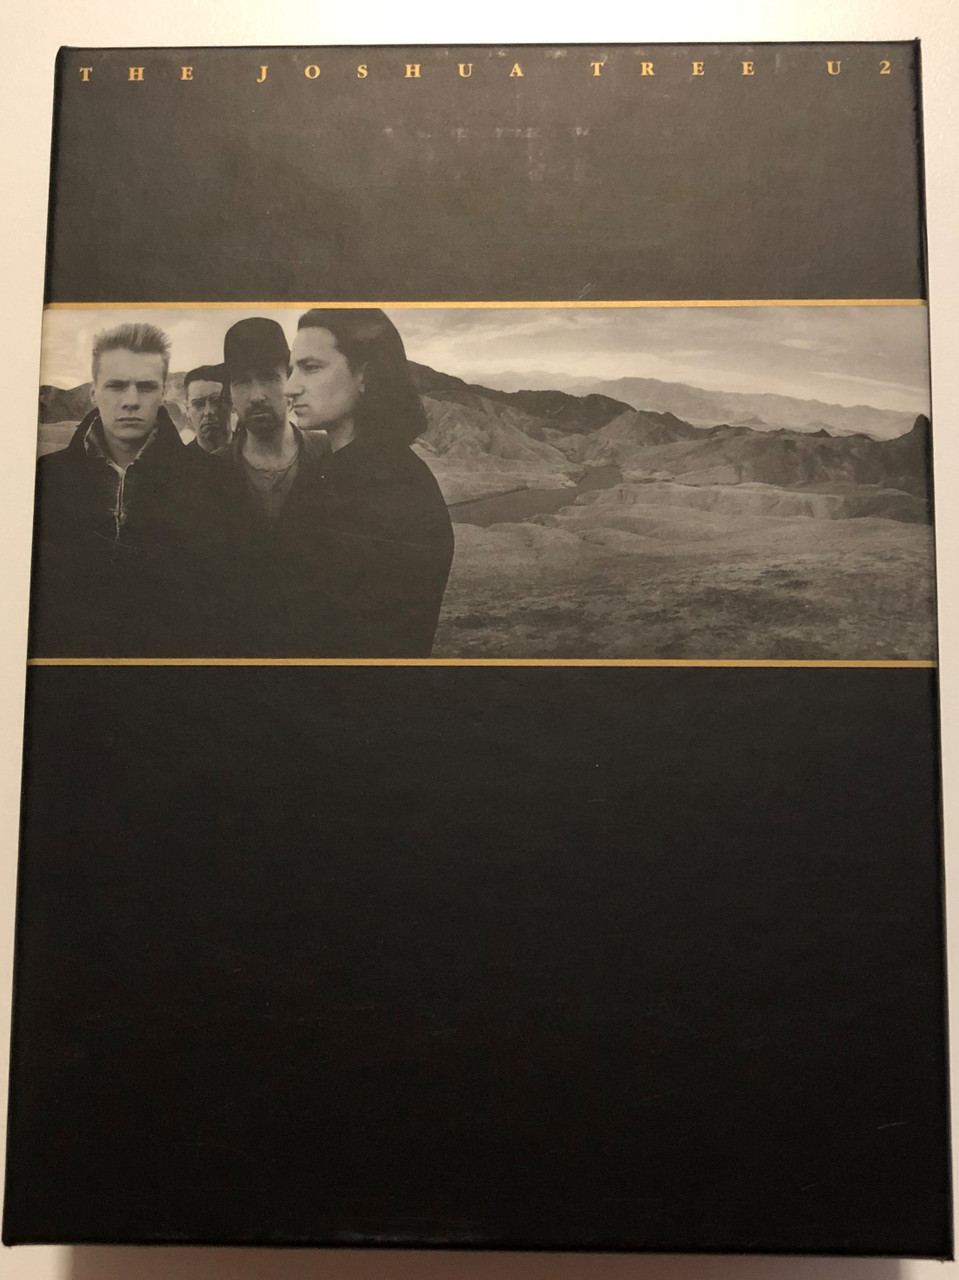 U2 - The Joshua Tree DVD 2007 / 2x CD + DVD / Box Set Limited Edition -  20th Anniversary Super Deluxe Edition / Mercury / DVD Containing Live  Footage, Documentary and Rare Videos - bibleinmylanguage